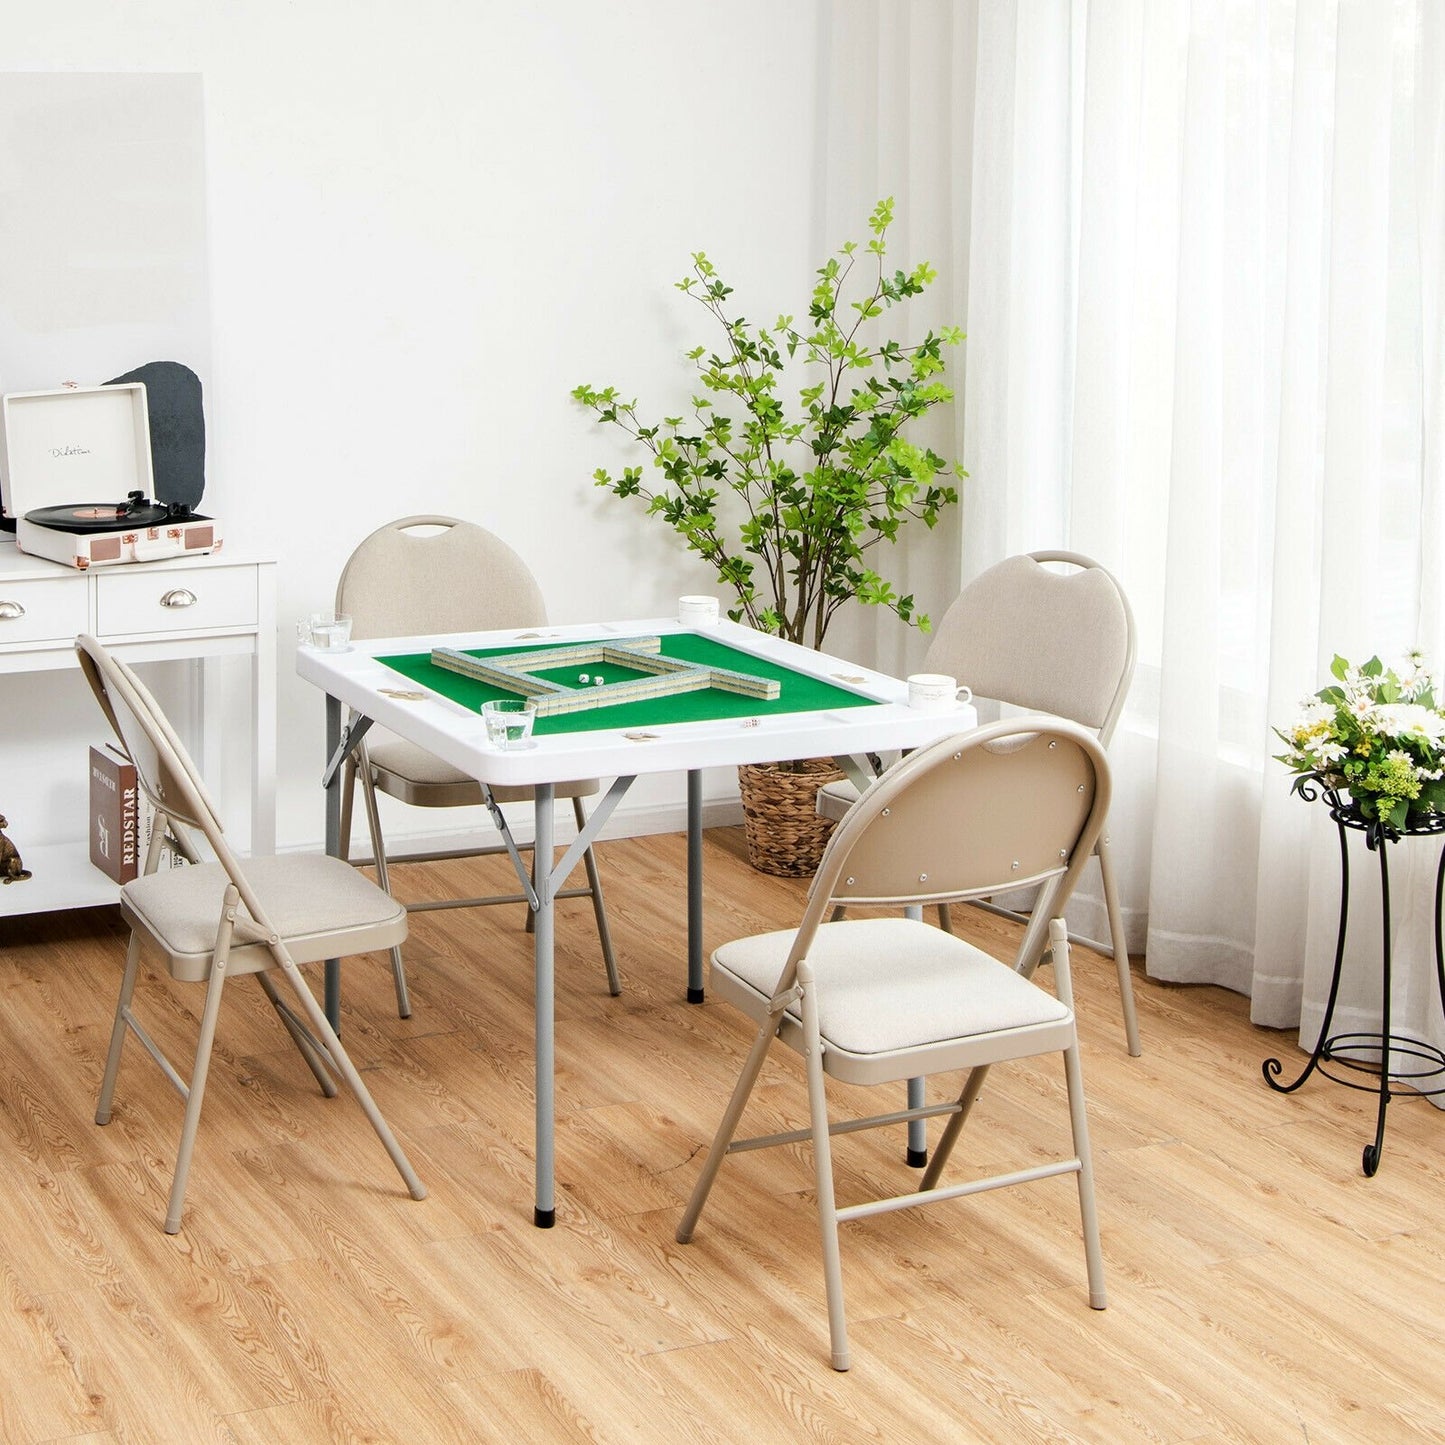 4-Player Mahjong Game Table with Iron Frame, Green - Gallery Canada